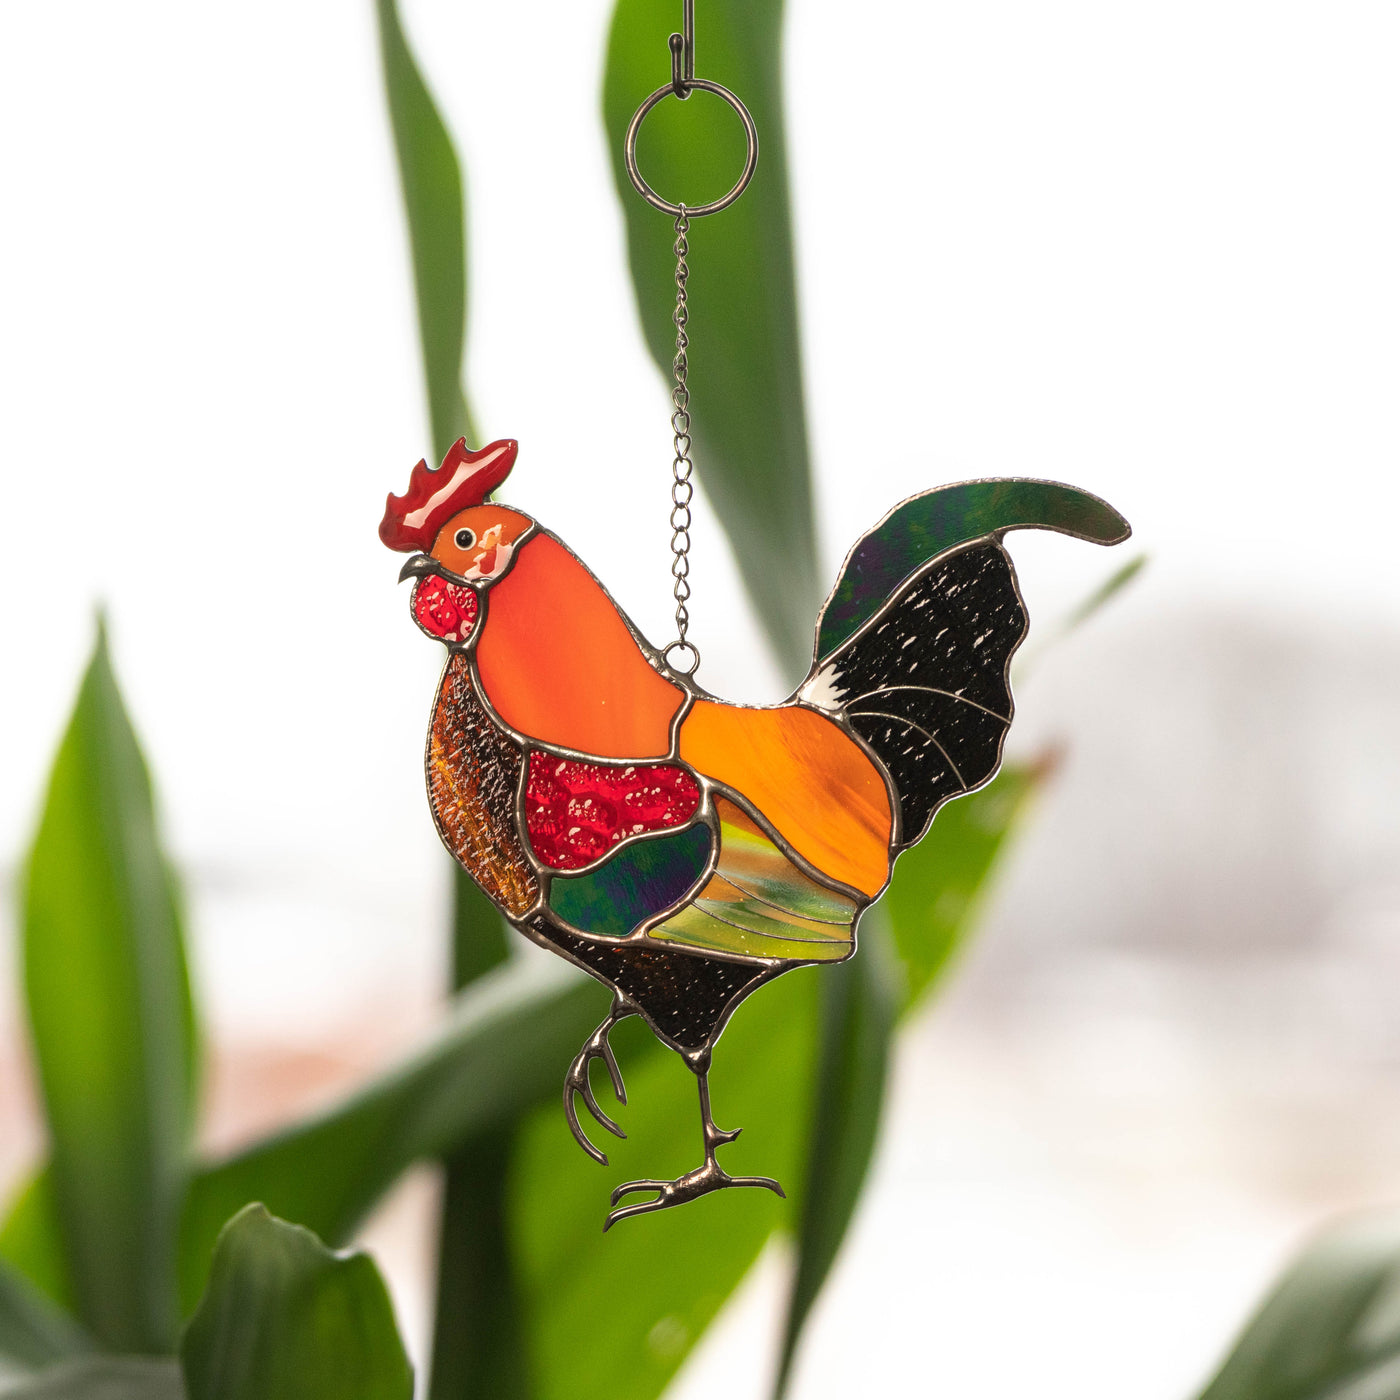 Bright rooster with iridescent tail suncatcher of stained glass